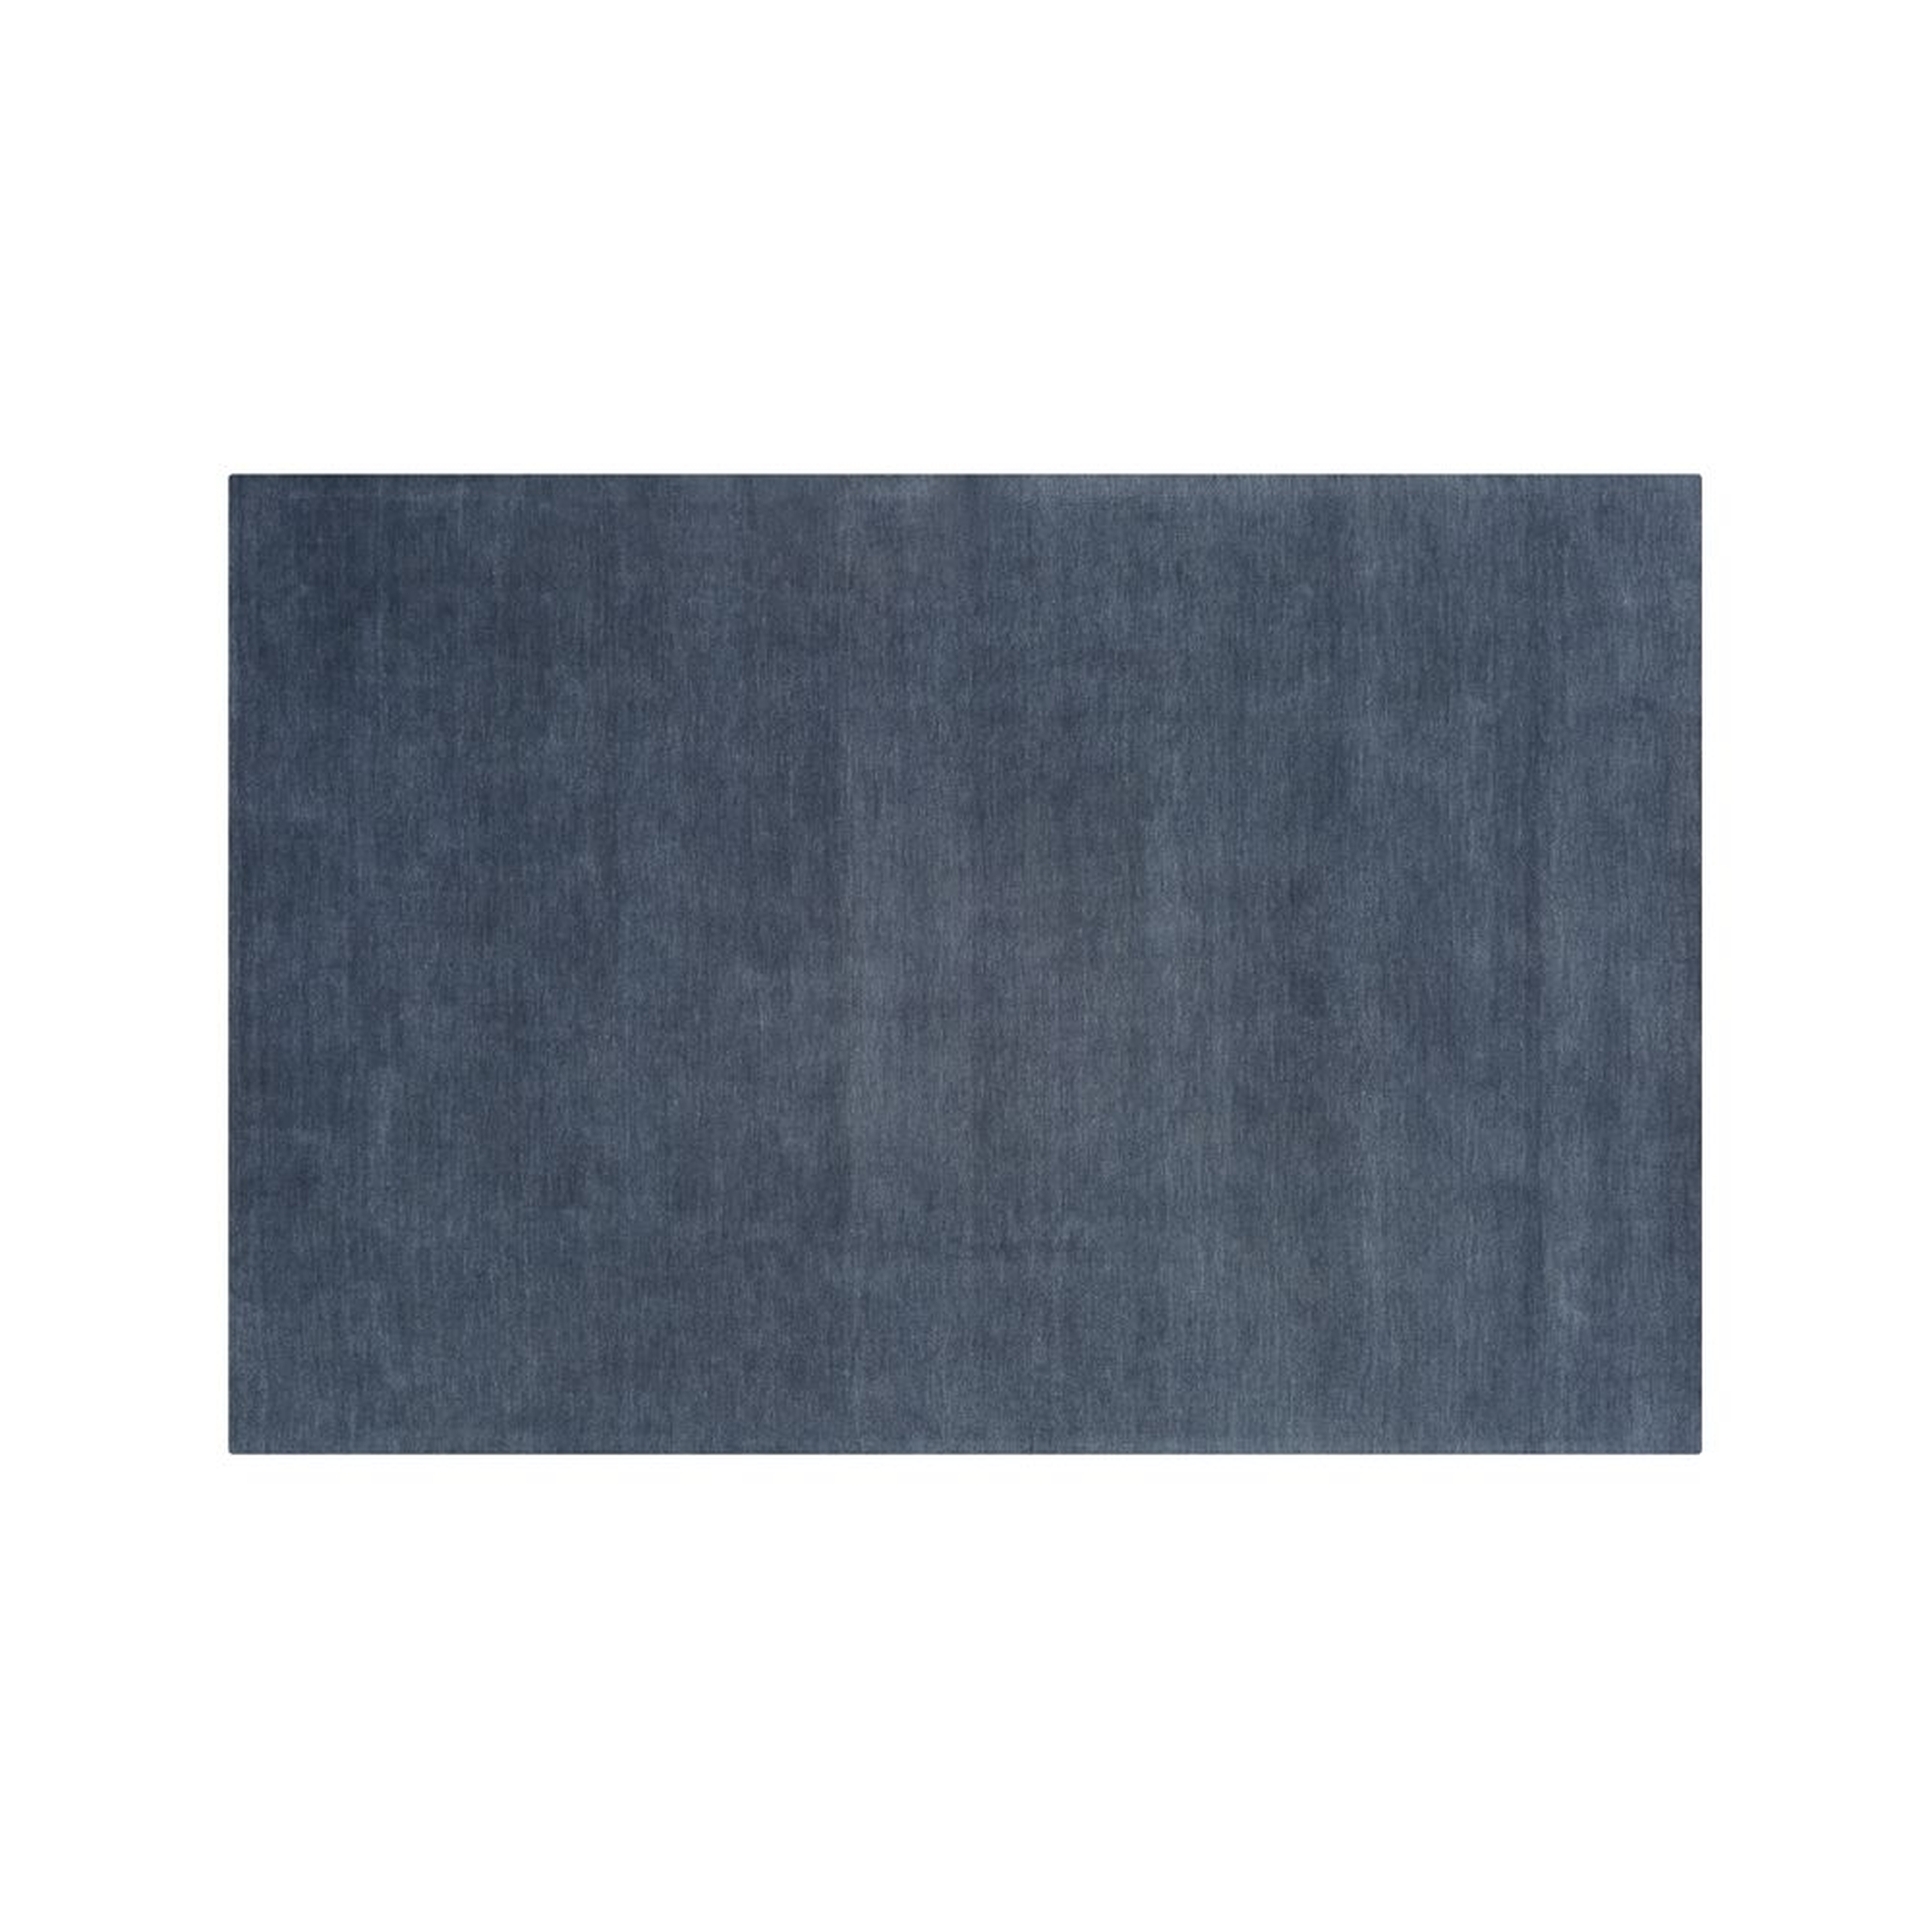 Baxter Blue Wool Area Rug 5'x8' - Crate and Barrel